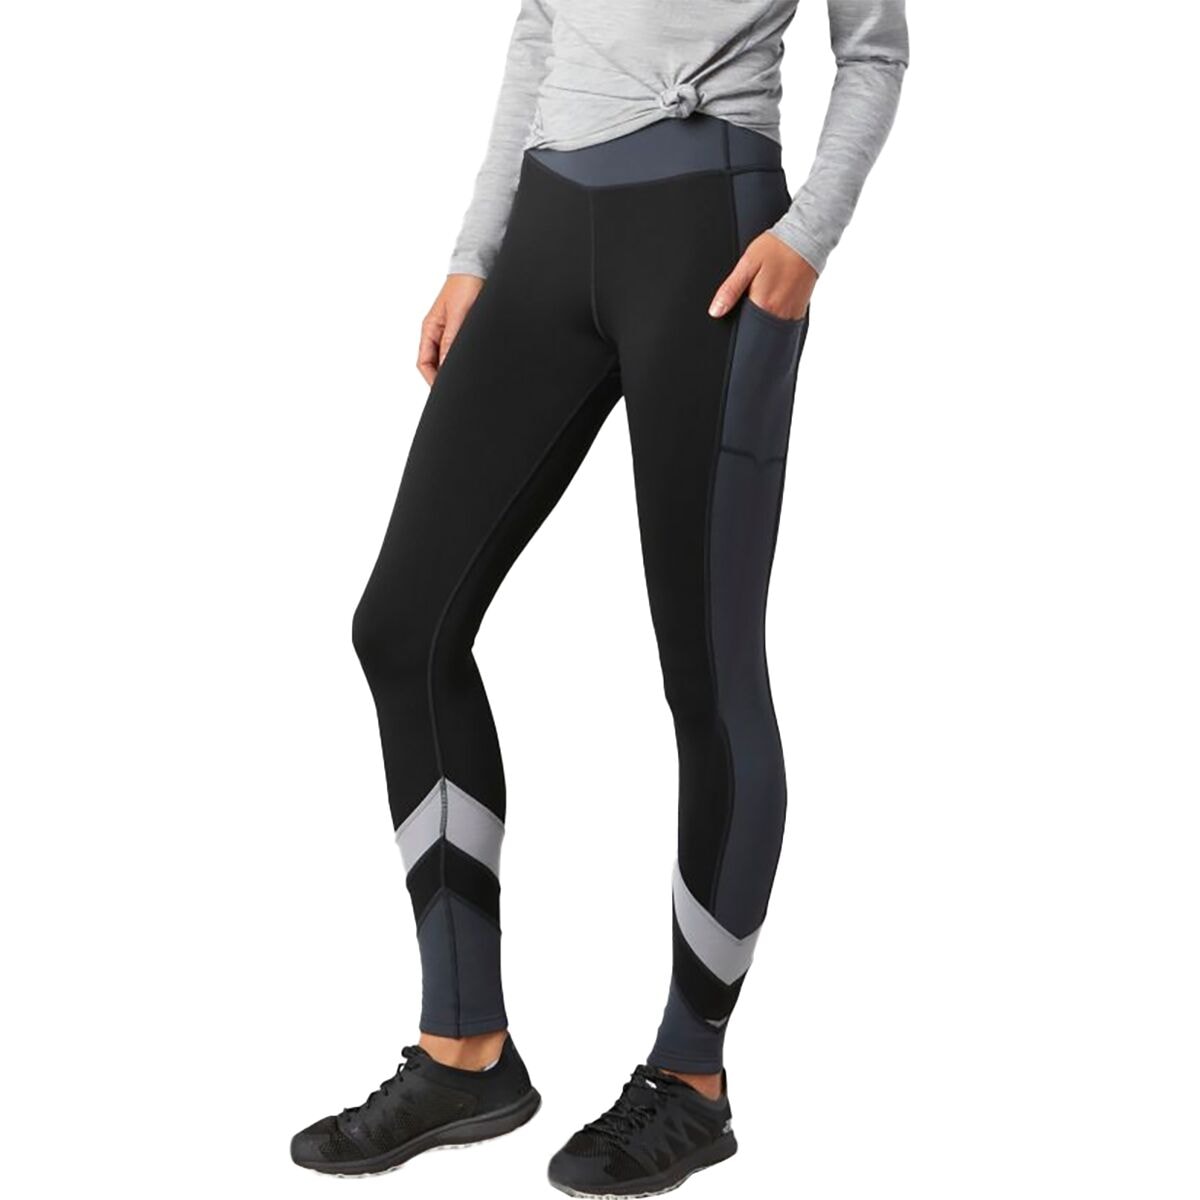 Ep. 46: Compression Leggings Review - Under Armour vs Nike 